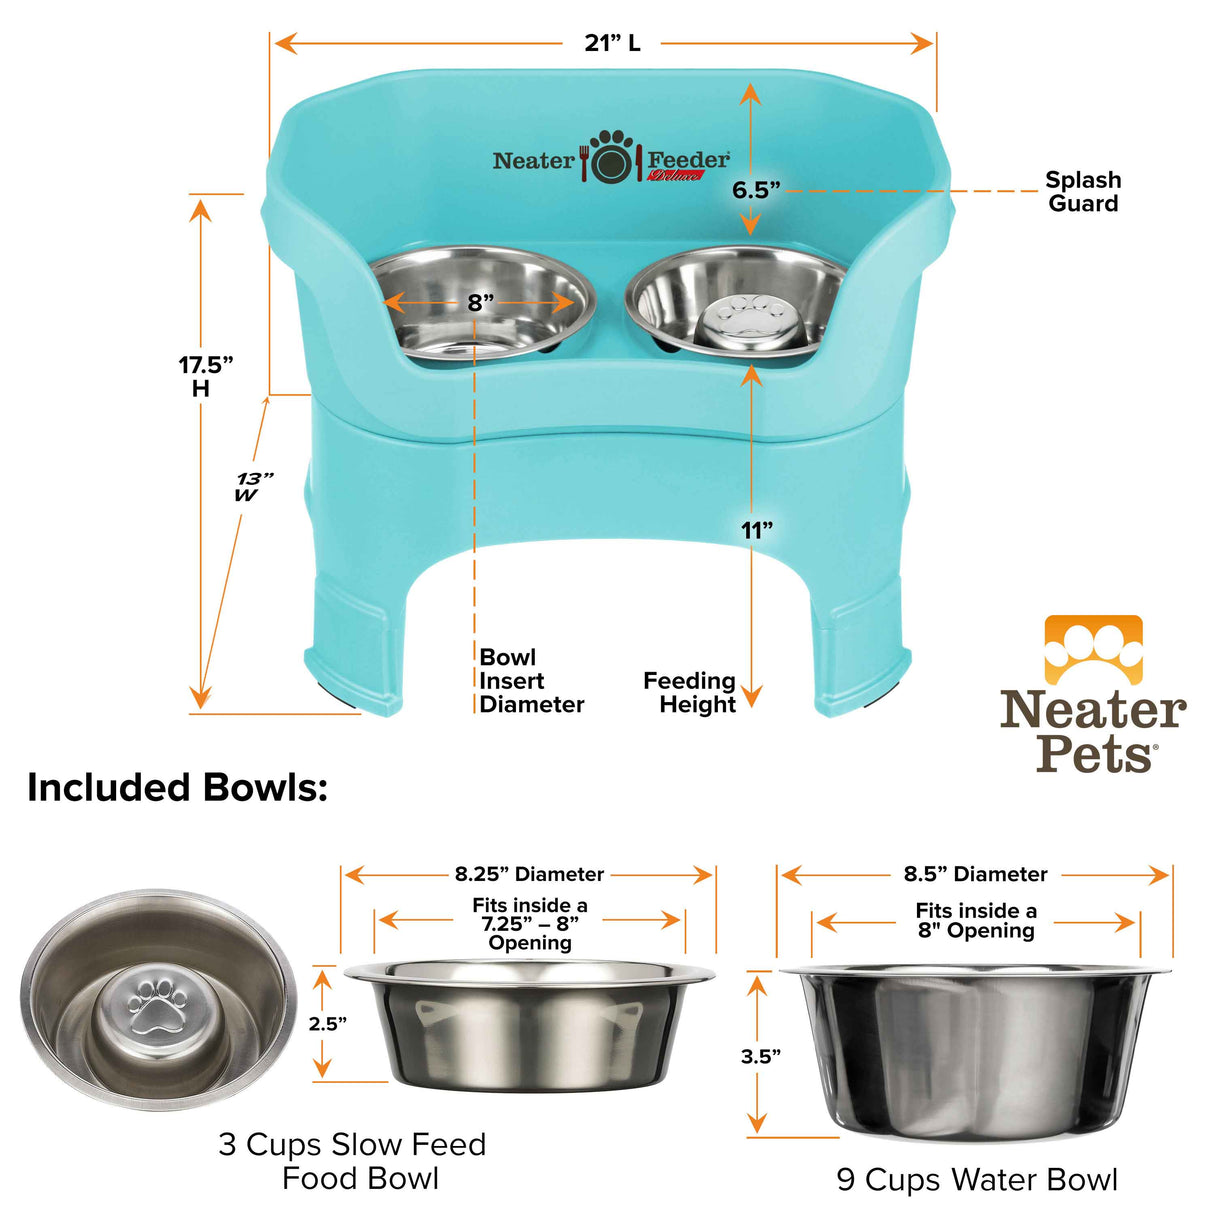 dimensions of aquamarine large DELUXE Neater Feeder with Stainless Steel Slow Feed Bowl with leg extensions